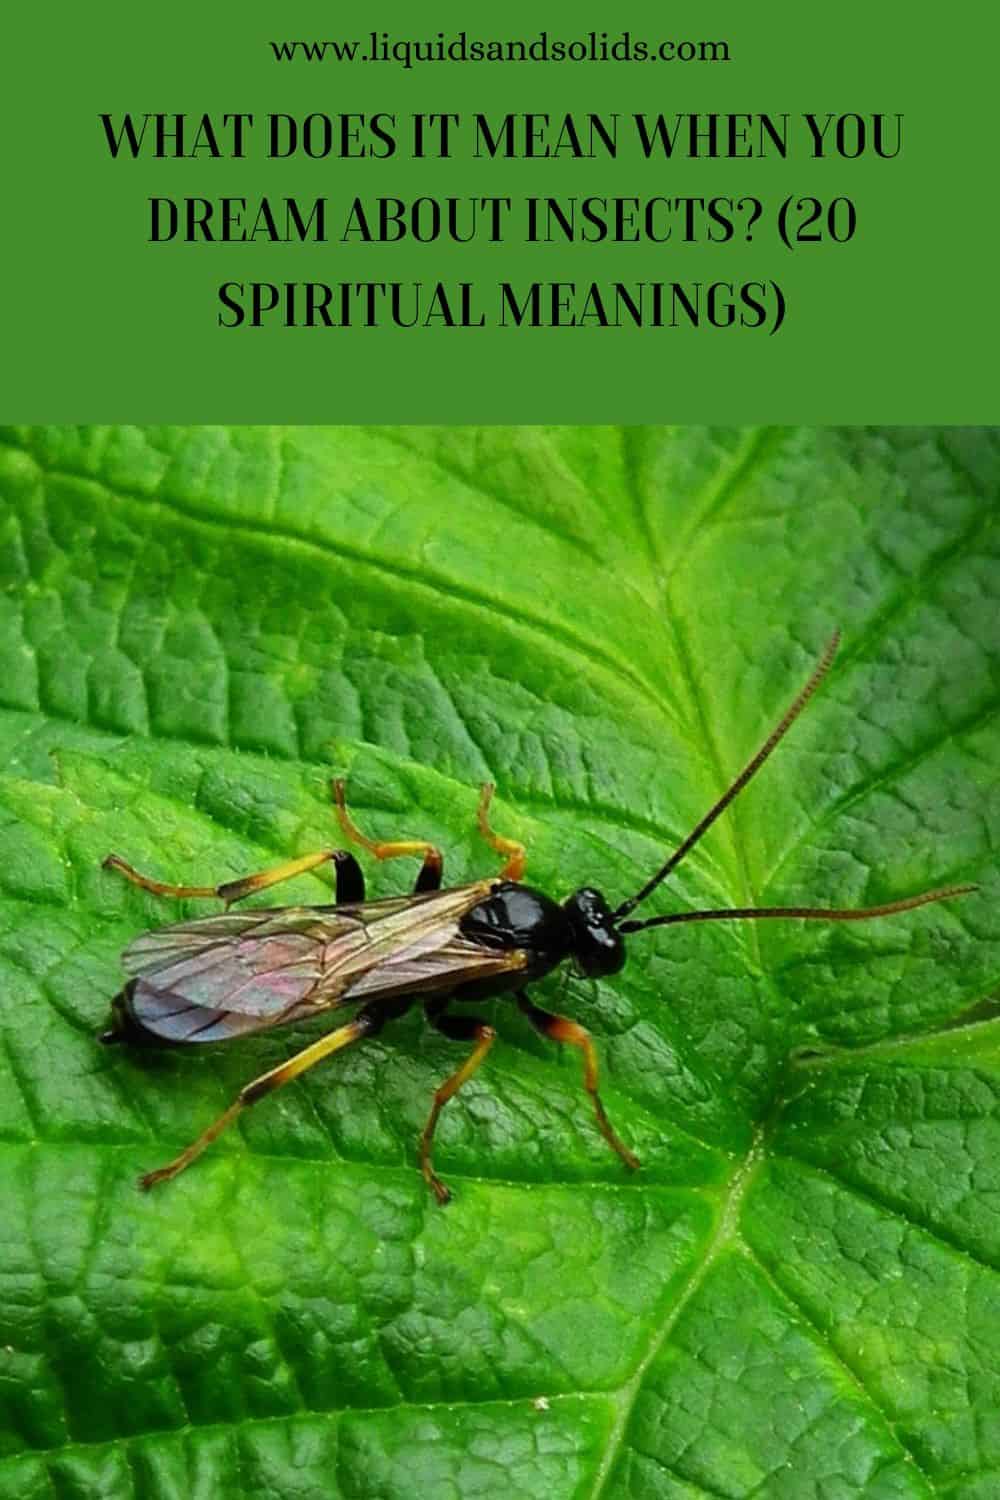 What Does It Mean When You Dream About Insects? (20 Spiritual Meanings)